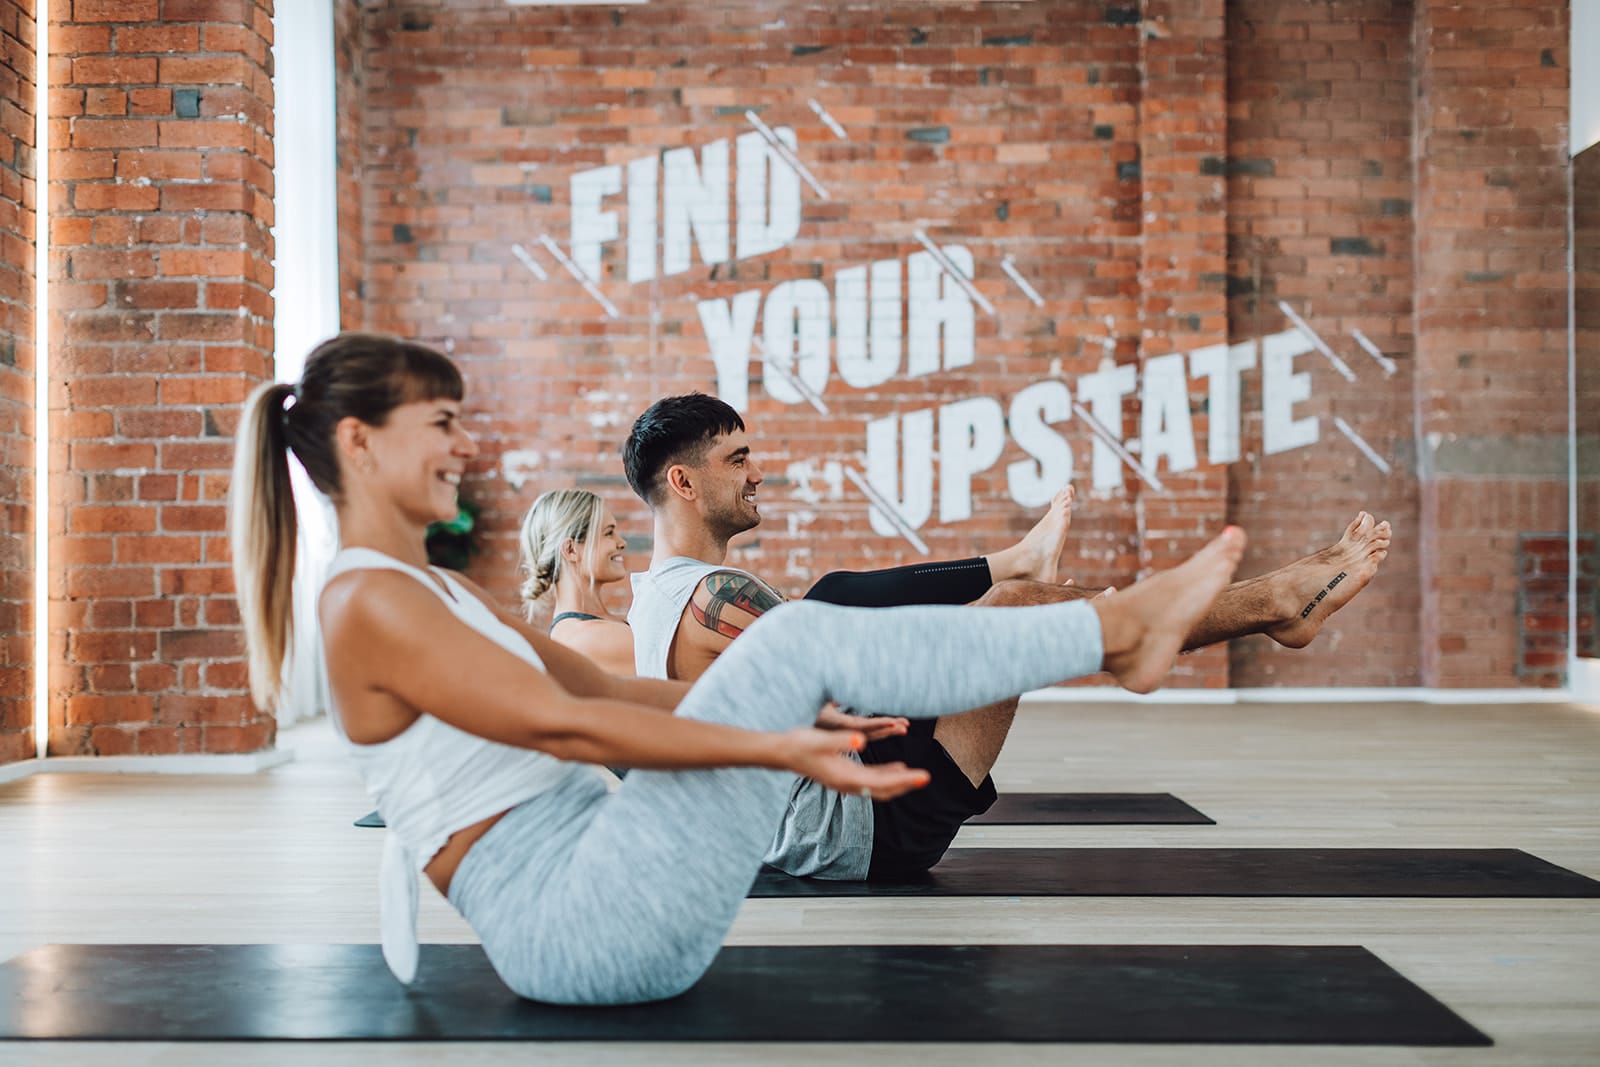 Group of happy people workout in Balaclava hot room. The studio space is made of industrial brick and there is a positive, bright atmosphere in the space.